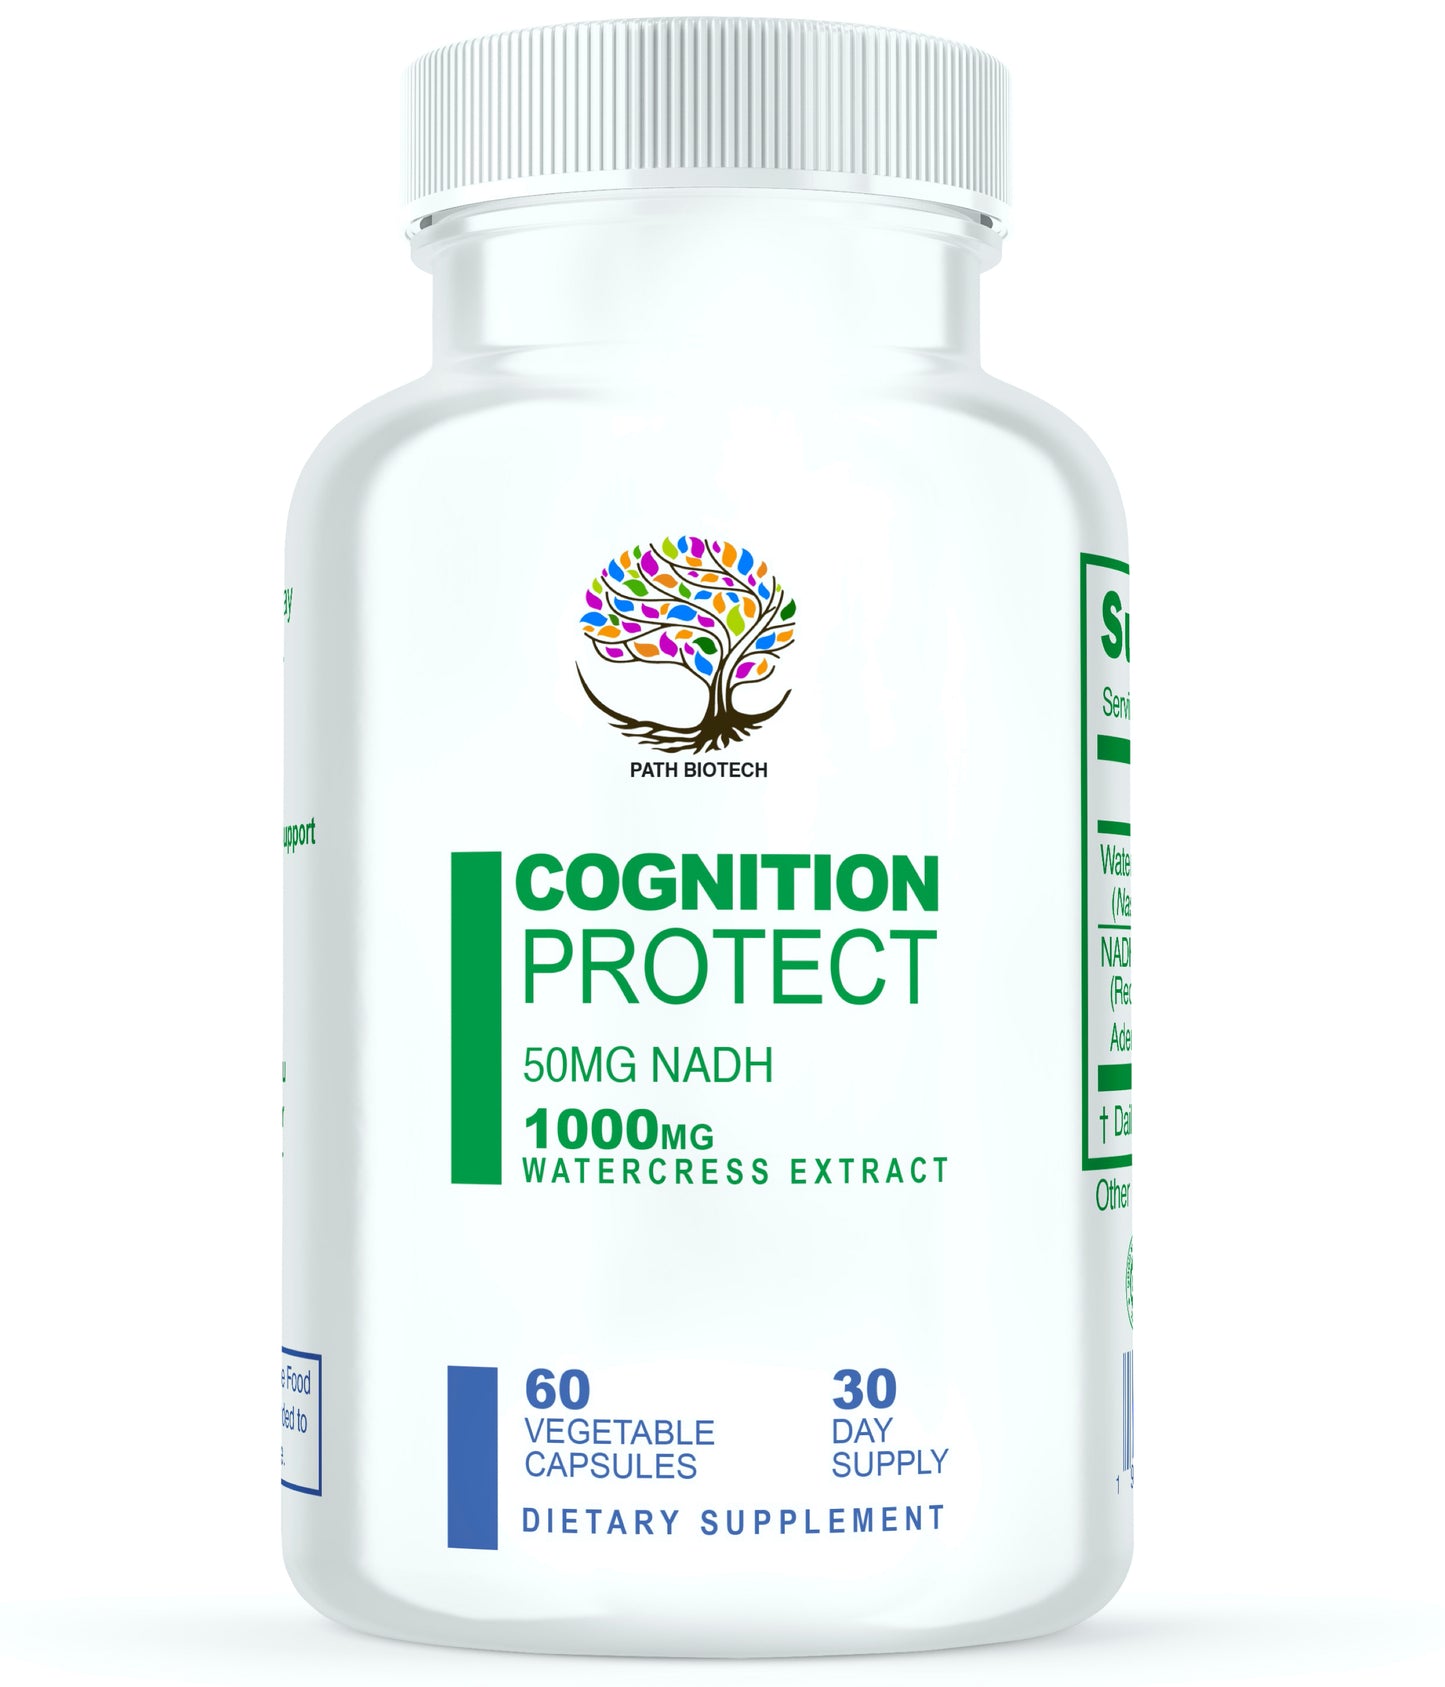 COGNITION PROTECT